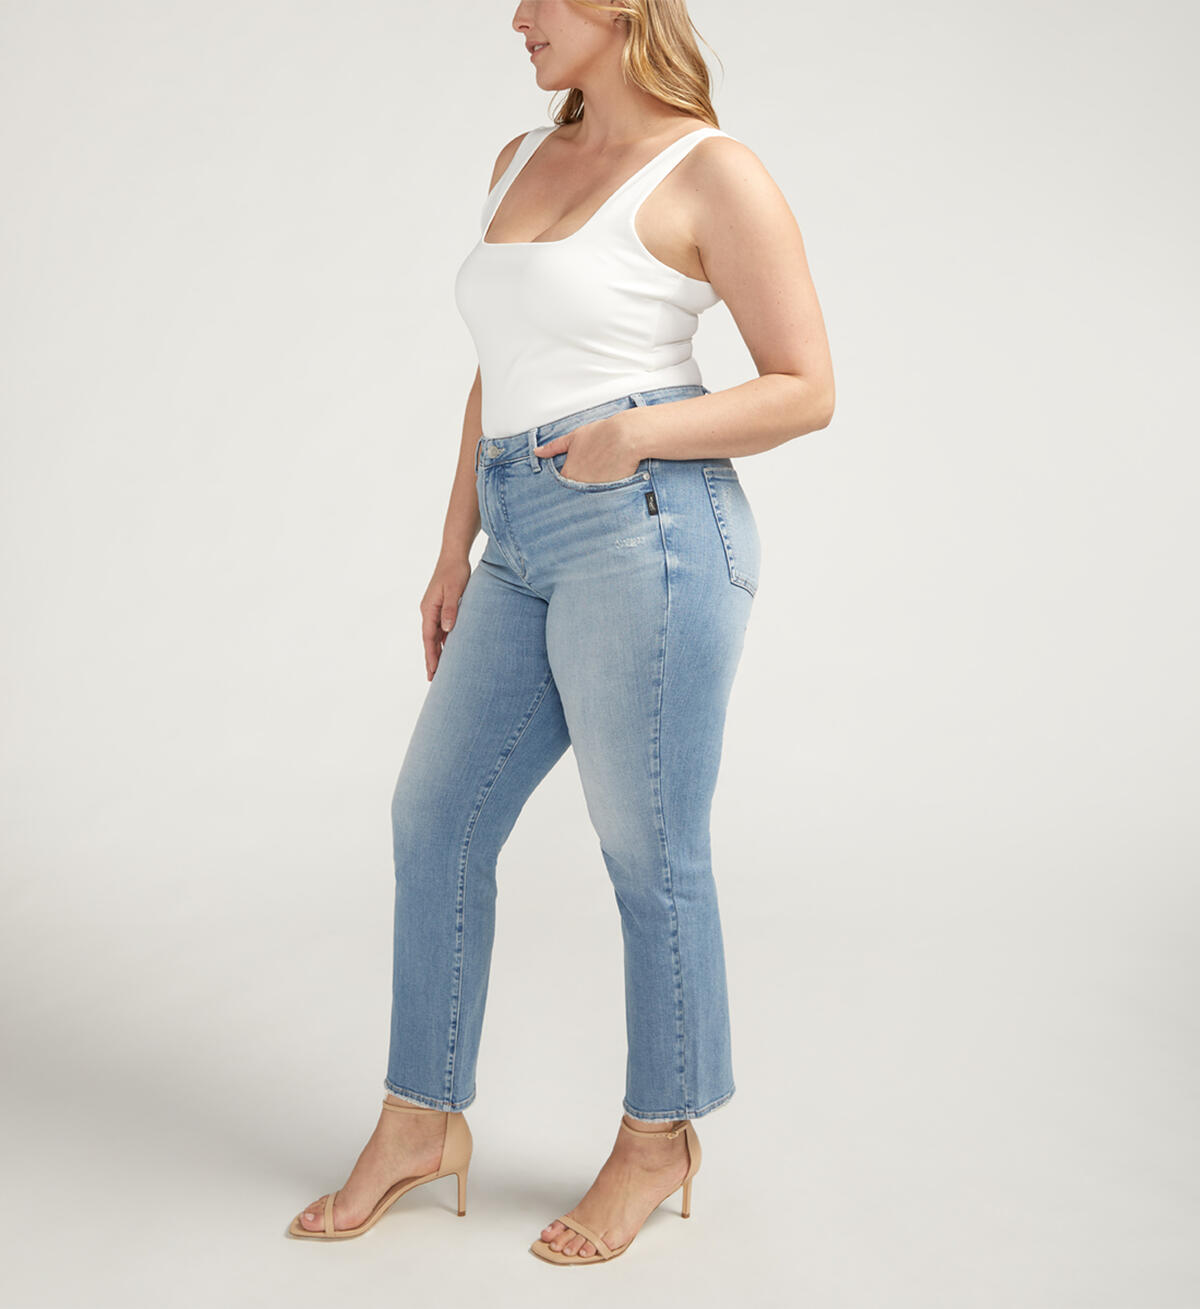 Isbister High Rise Straight Leg Jeans Plus Size, , hi-res image number 2